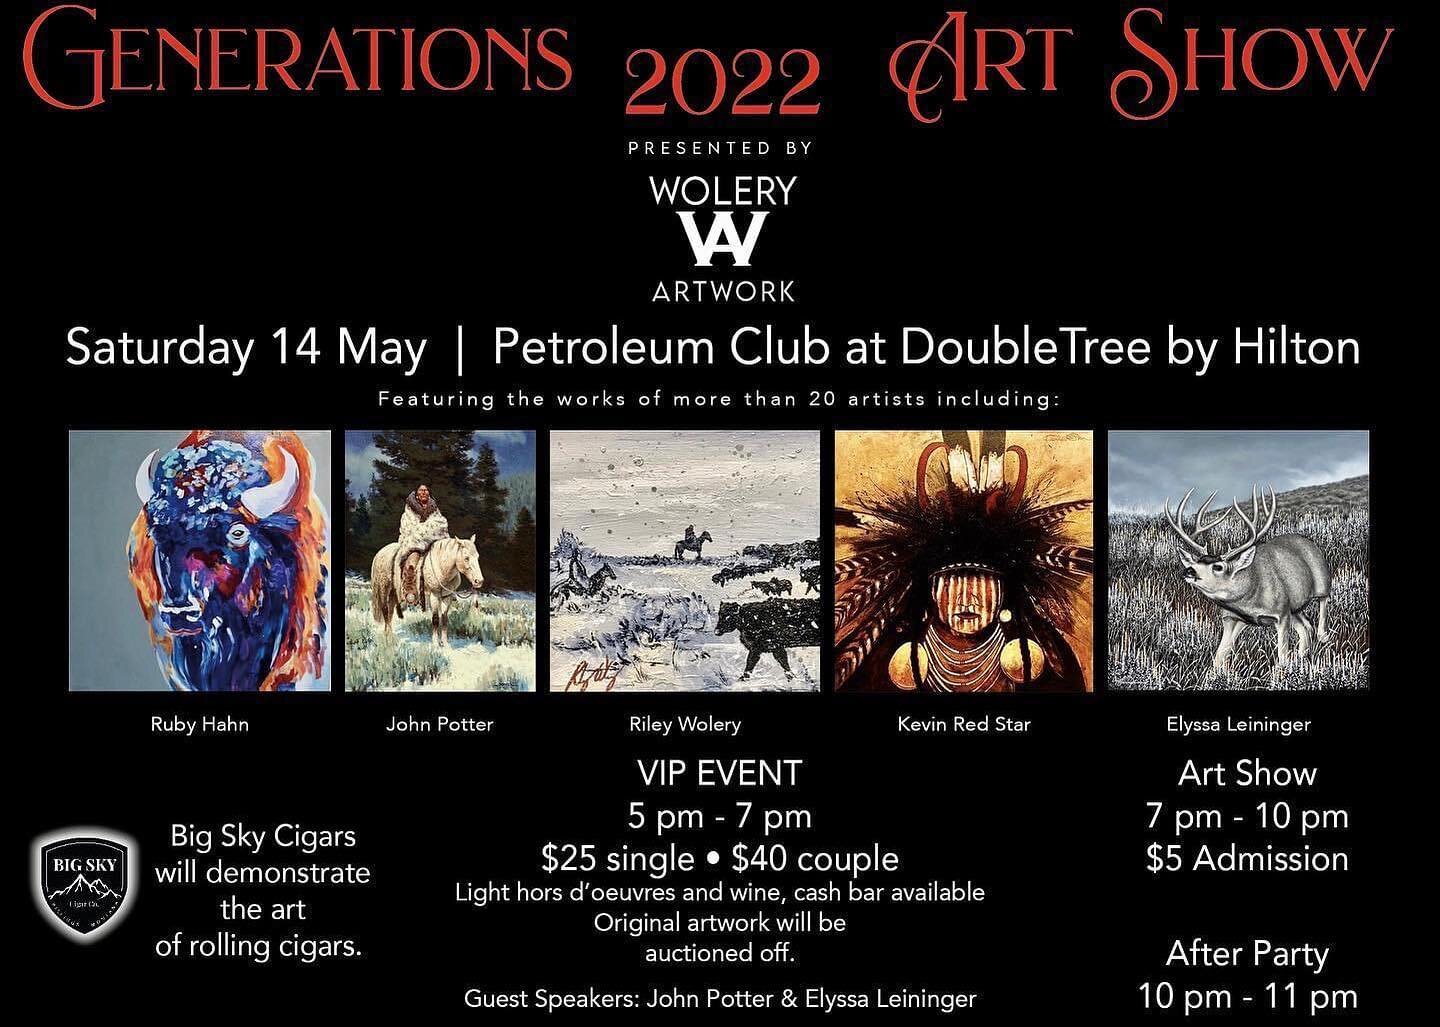 I&rsquo;m so excited and honored to be to be a part of this show! I will be speaking at the event and participating in the quick draw. The quick draw pieces will be auctioned off to benefit the Murdered and Missing Indigenous Women nonprofit. Mark it